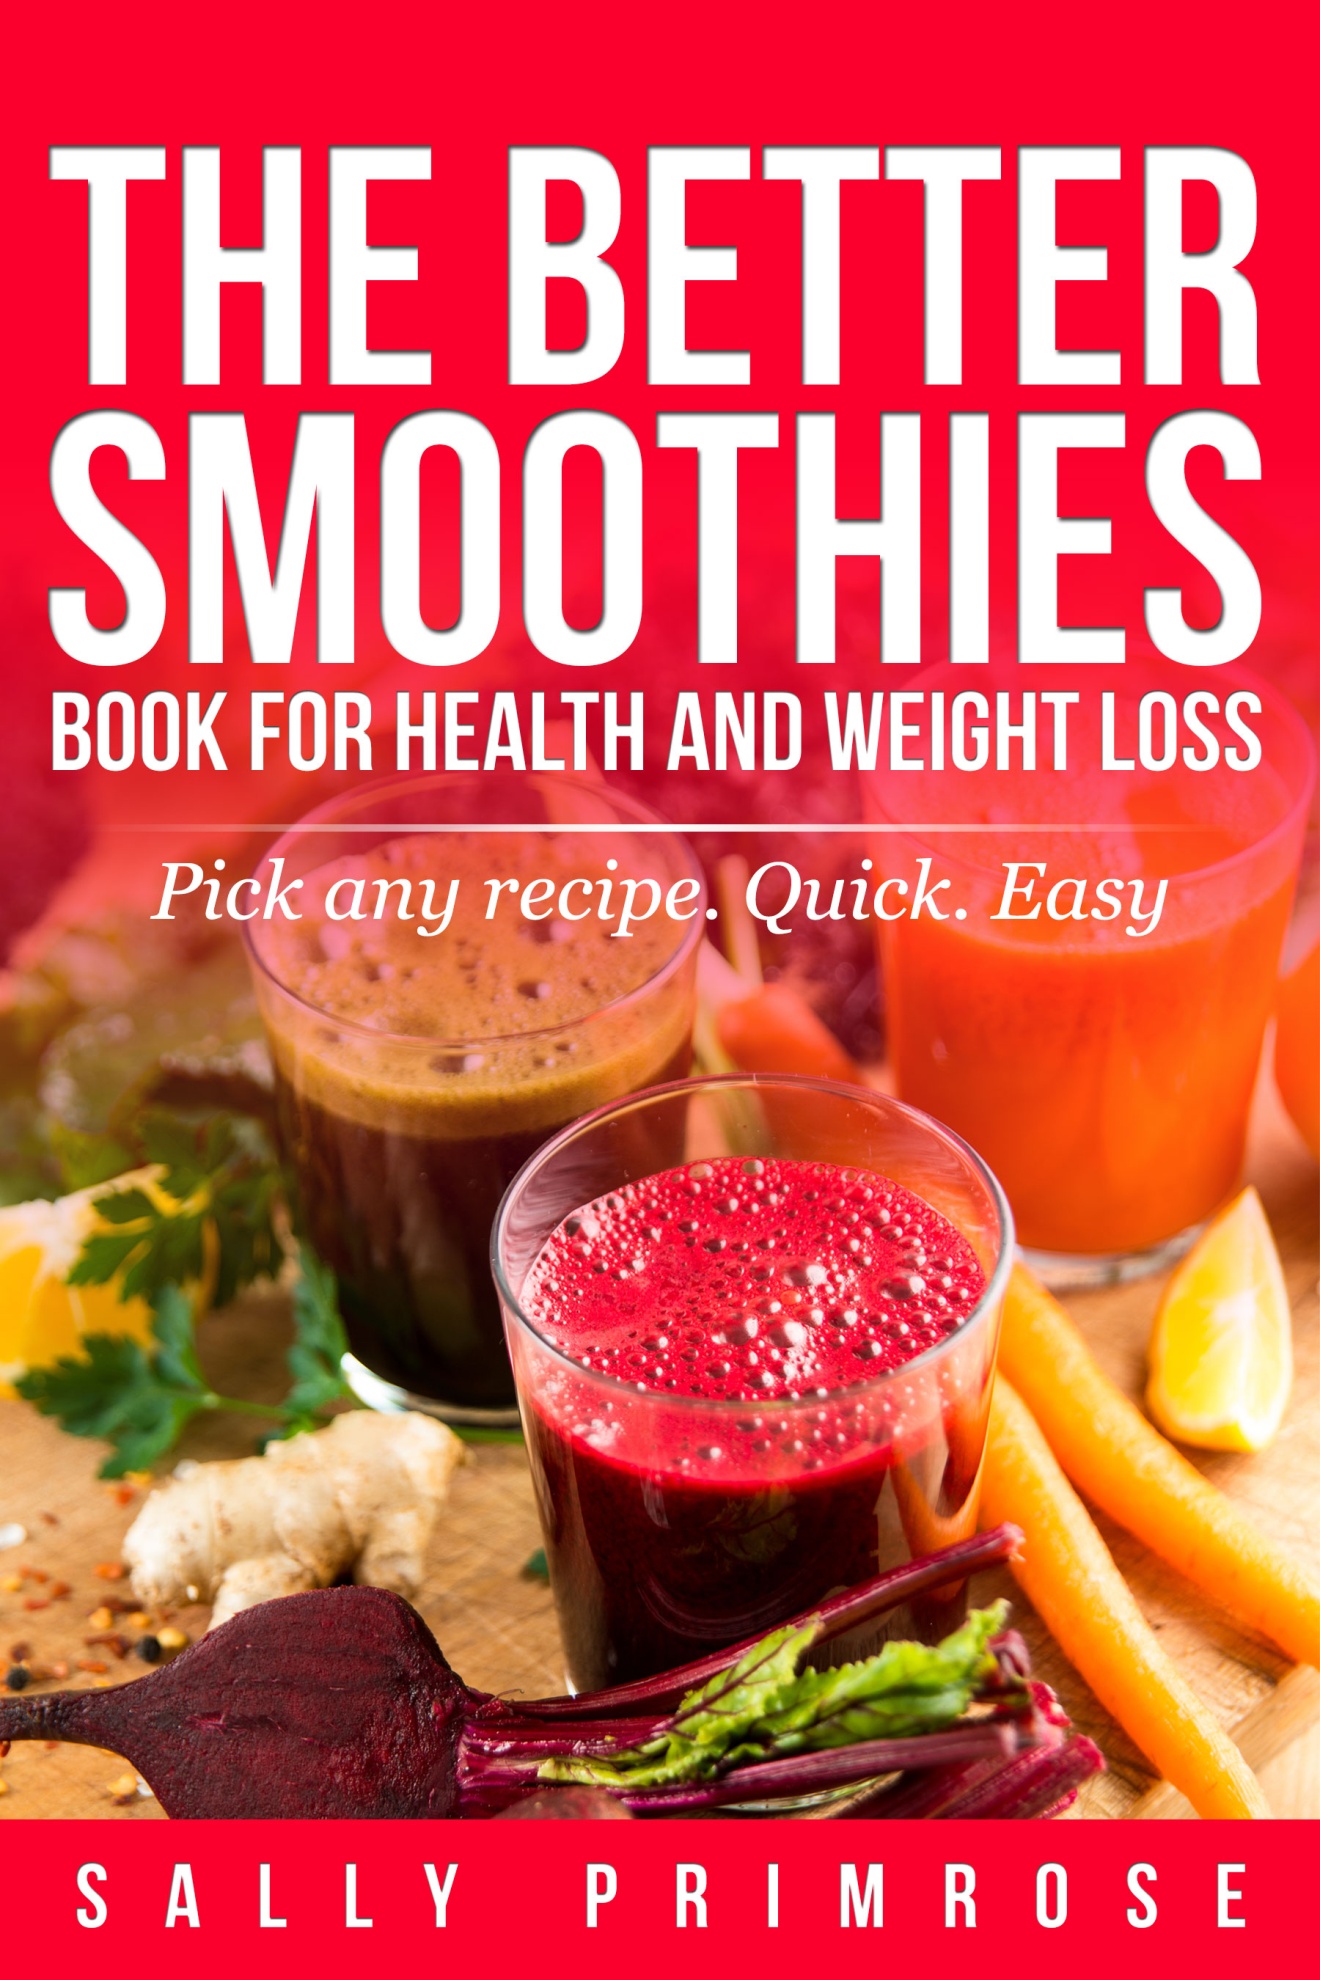 FREE: THE BETTER SMOOTHIES BOOK: For Health and Weight Loss and Diet by Sally Primrose